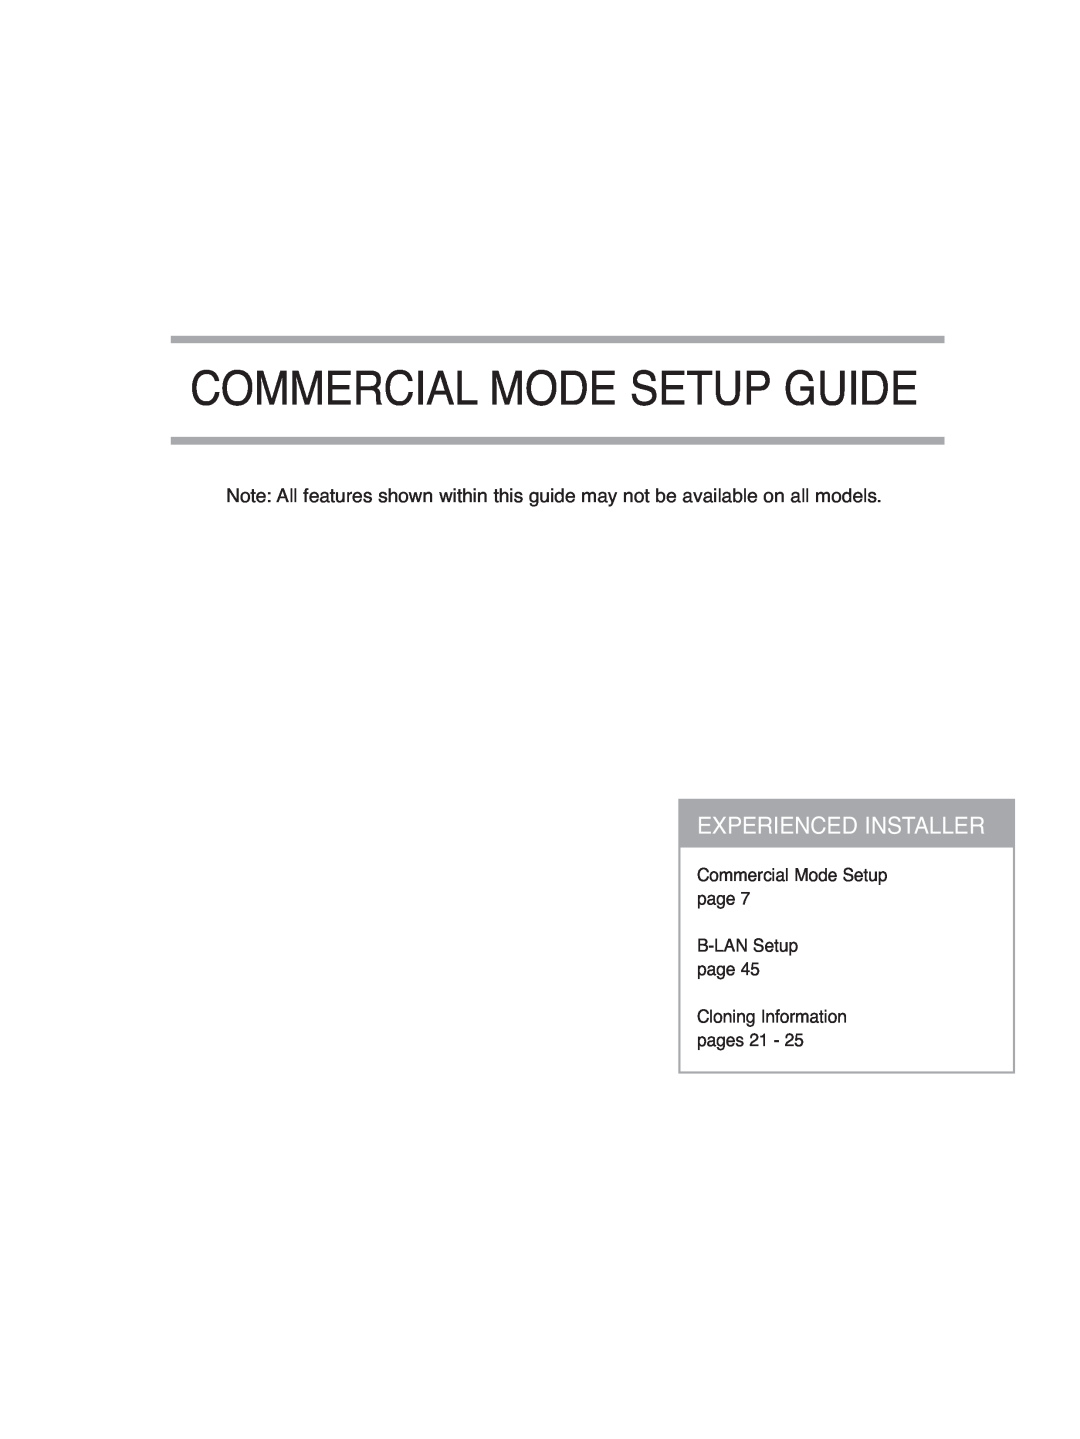 LG Electronics SAC34026004, 42LH255H, 42LH260H, 37LH250H, 37LH260H Commercial Mode Setup Guide, Experienced Installer 